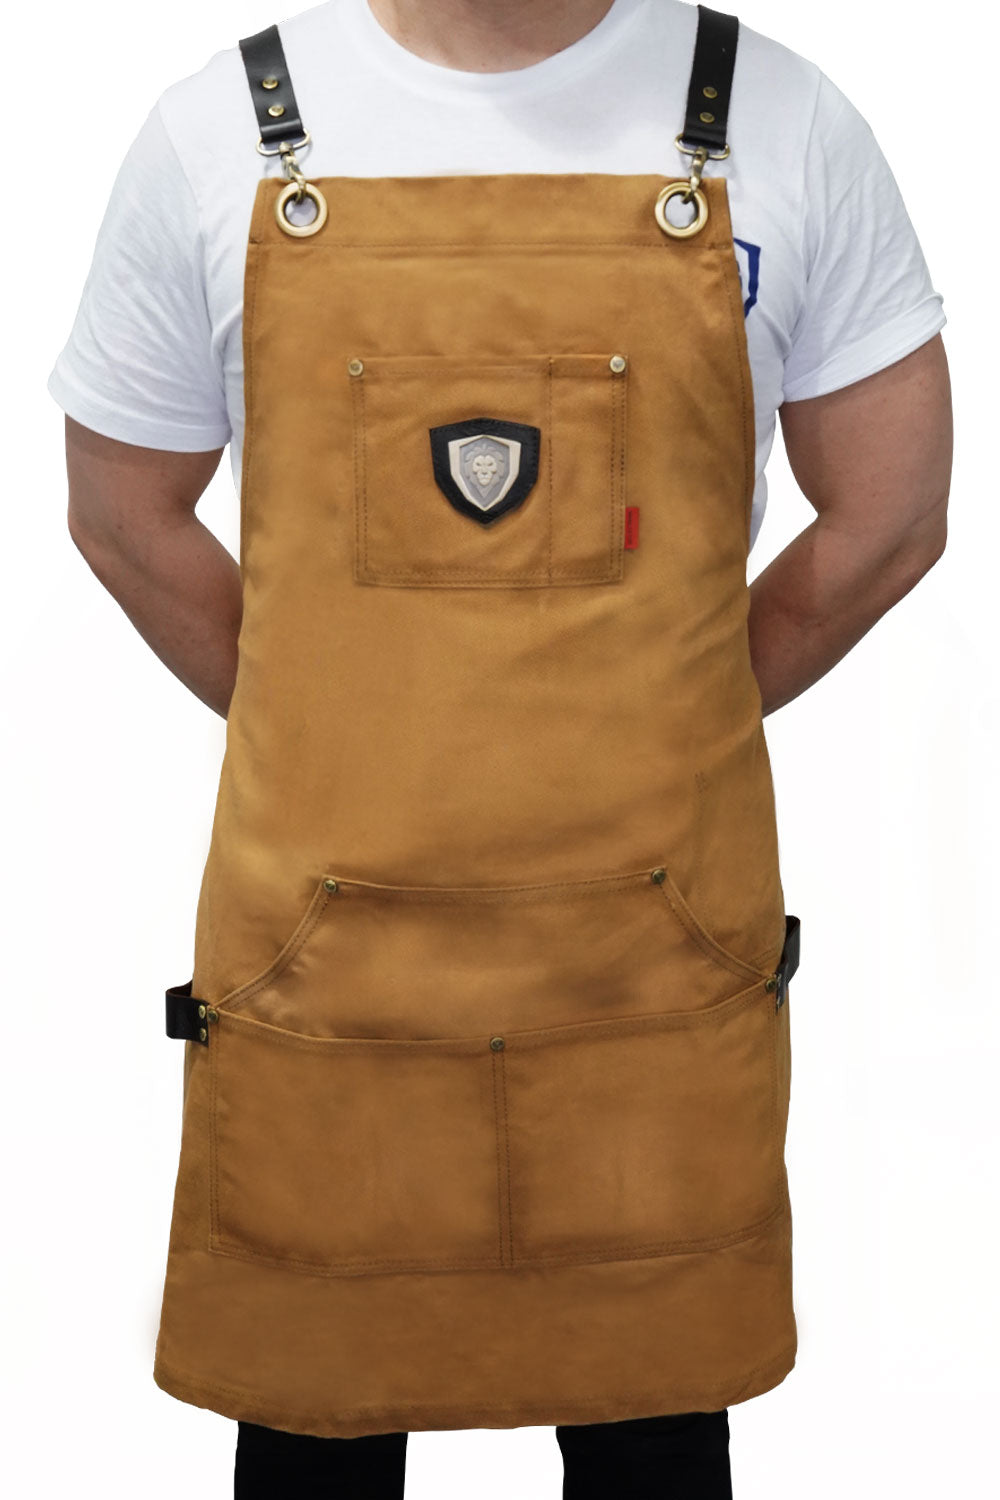 A man wearing the Dalstrong heavy-duty waxed canvas professional chef apron brown dessrt drifter.